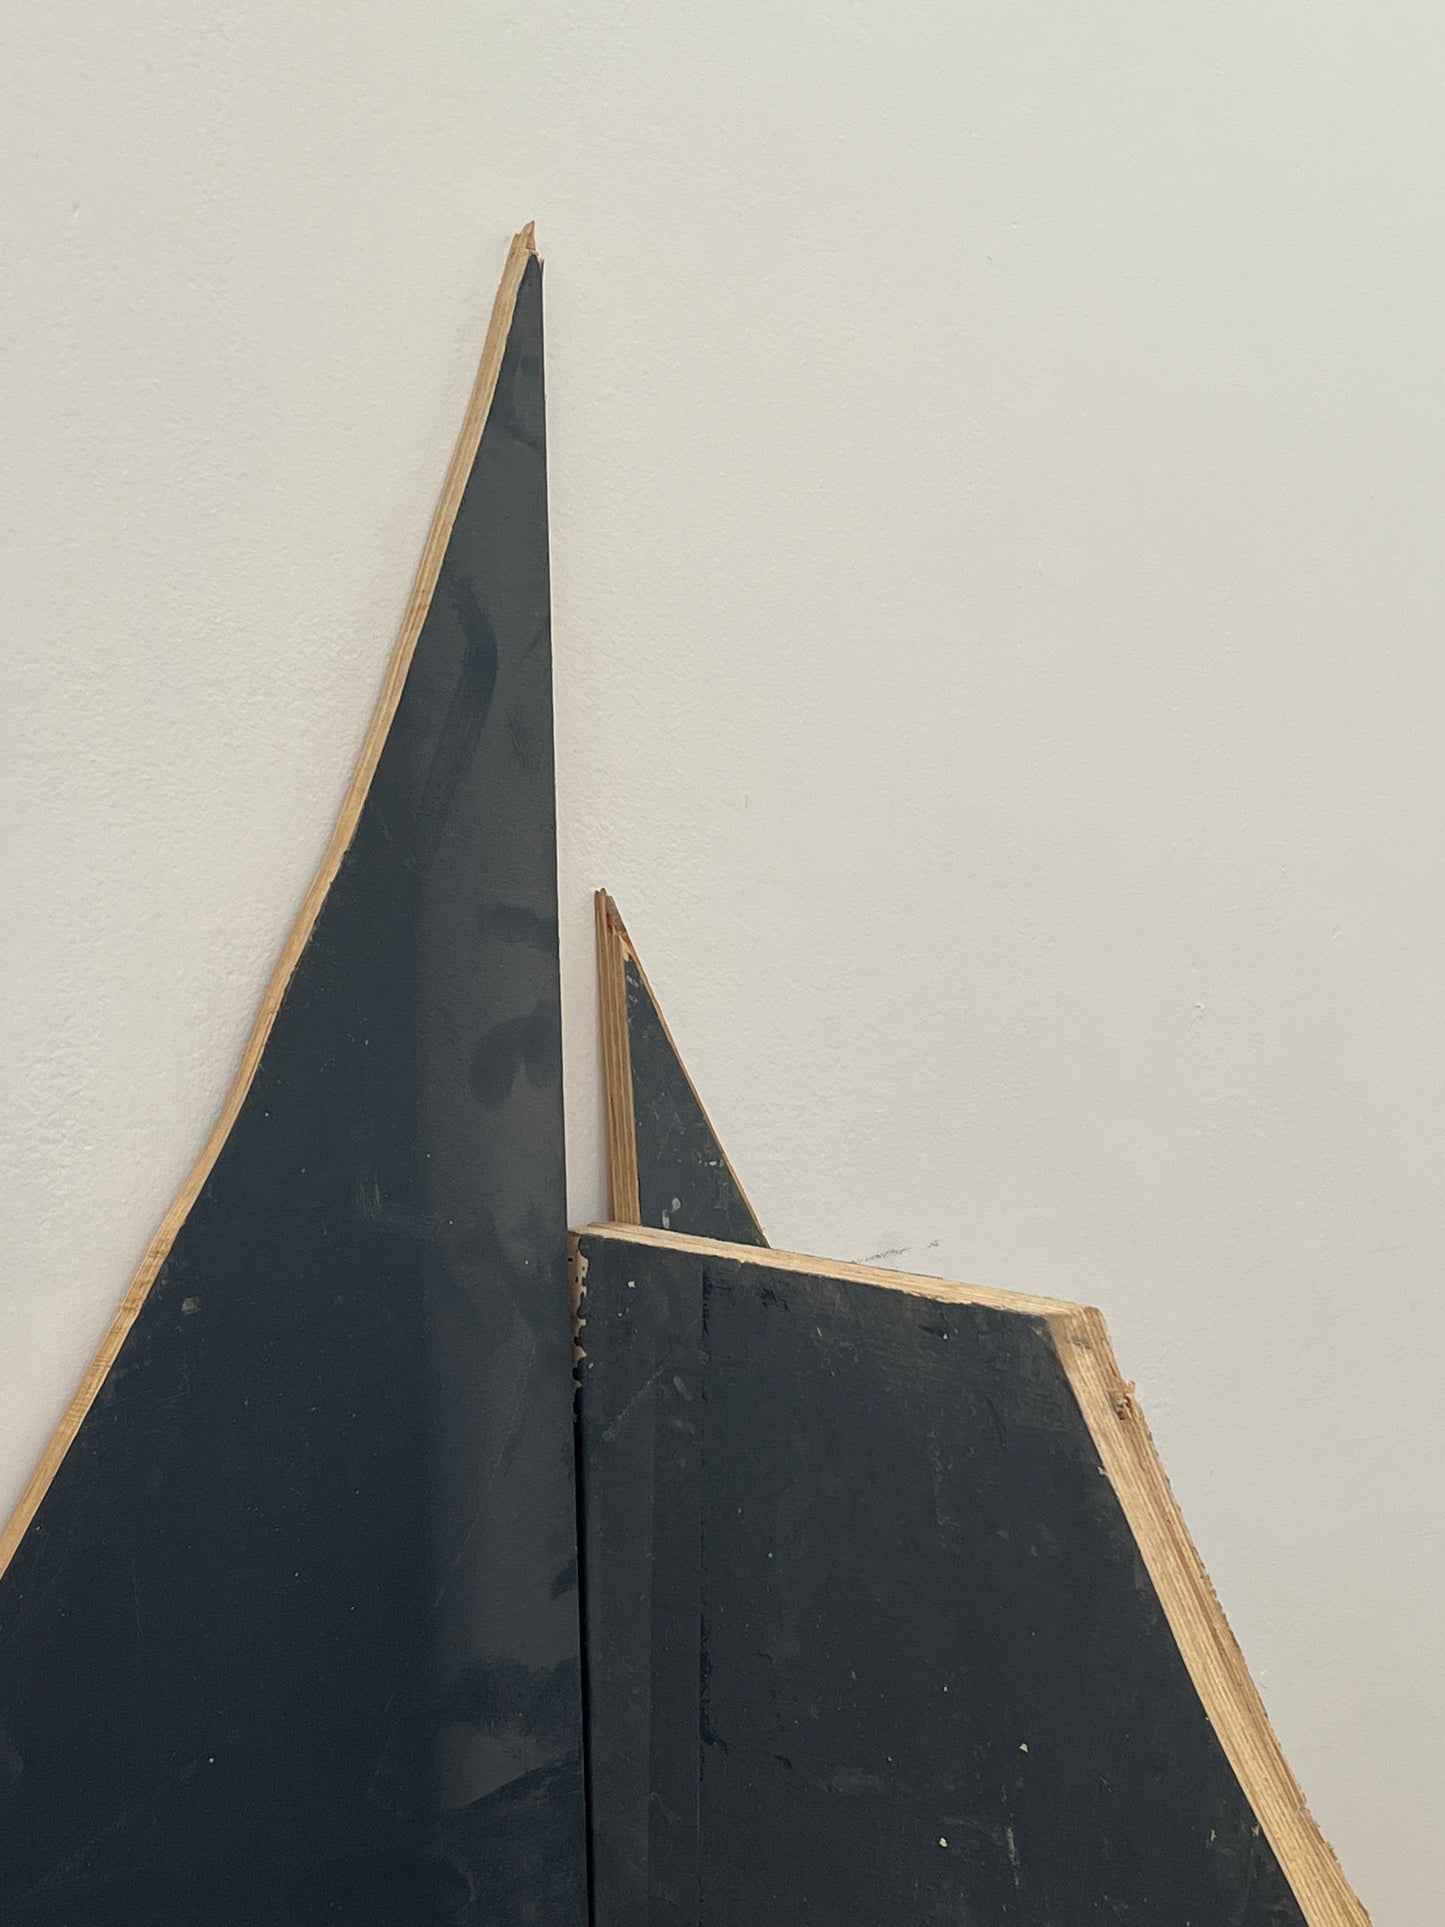 USED UP | Chilean Pavilion | Black and Blue Plywood Panels, 1.3.4c